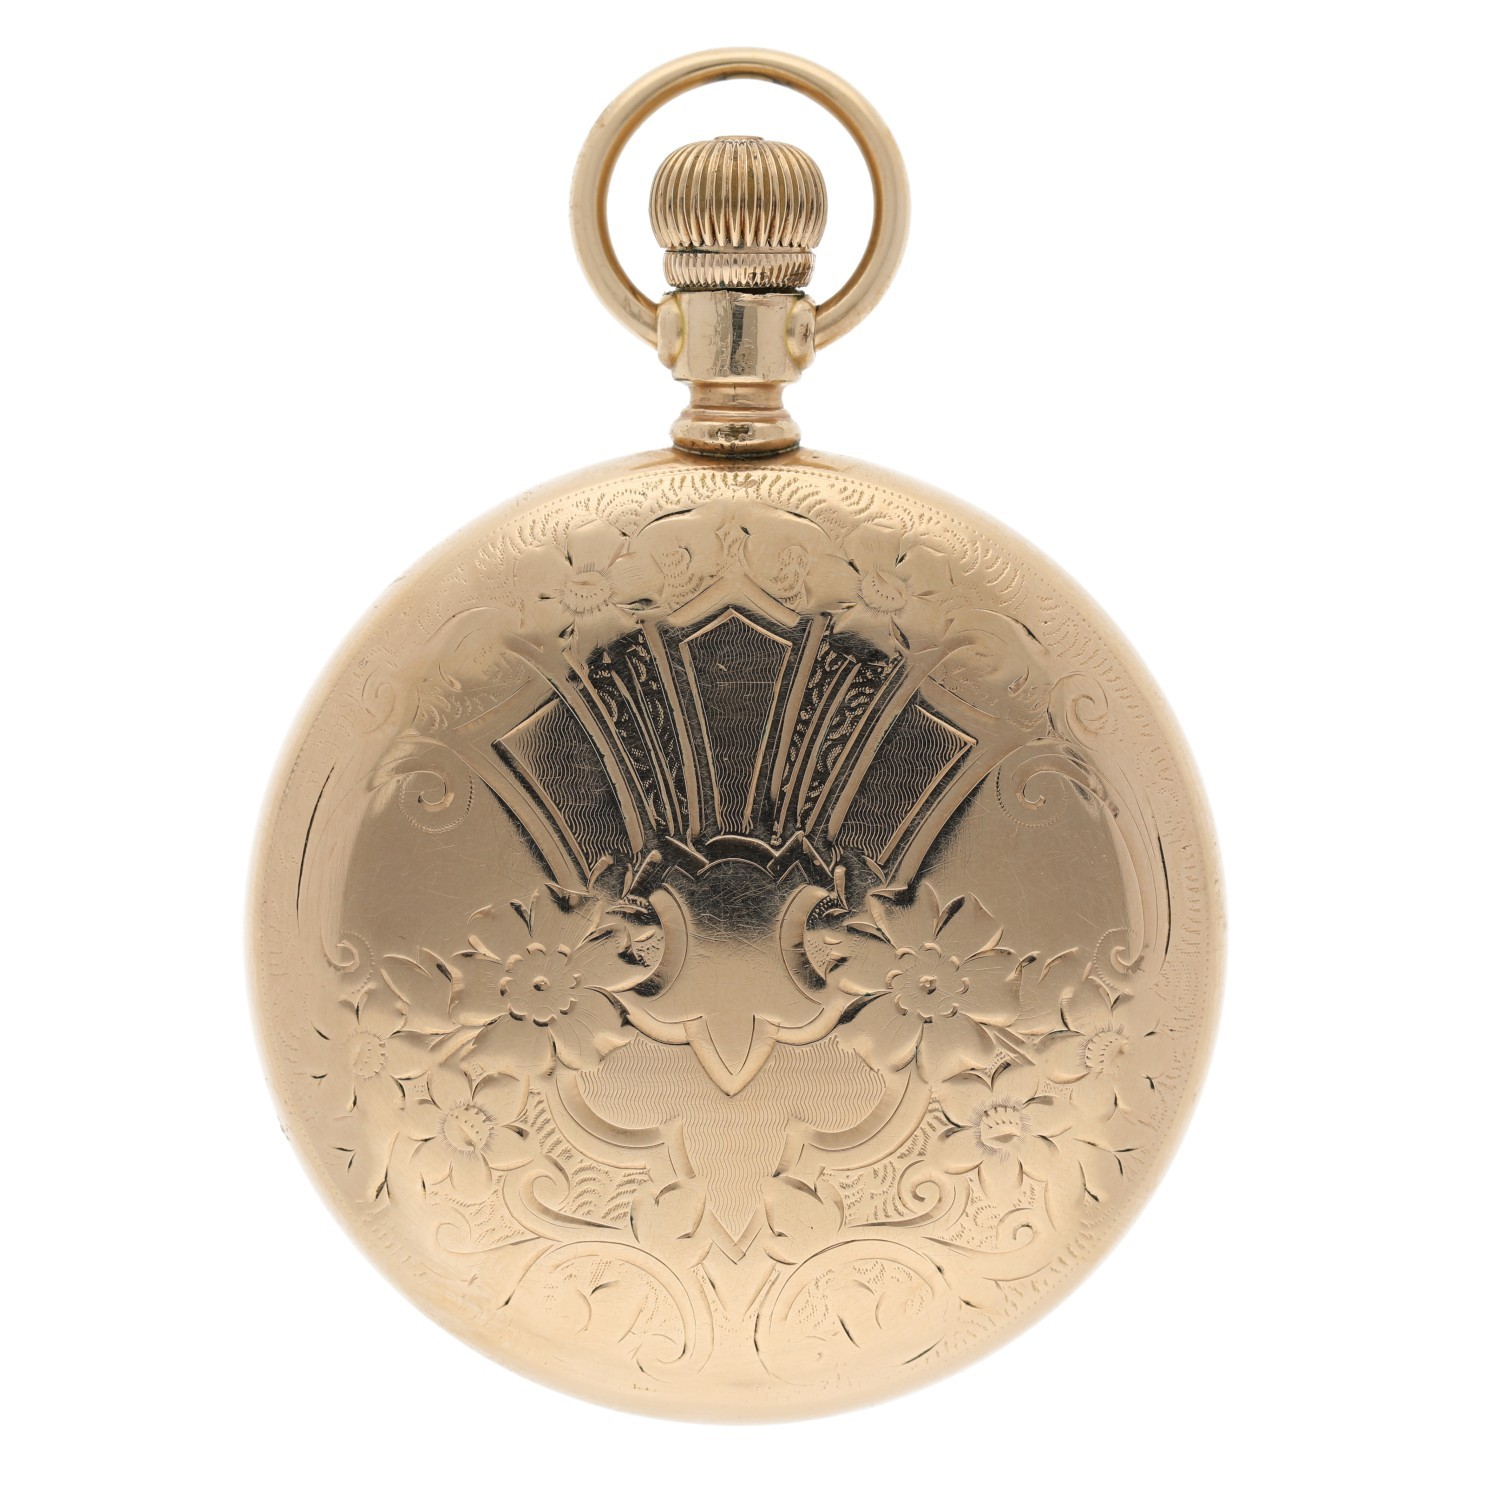 Elgin National Watch Co. 'Veritas' gold plated lever set pocket watch, circa 1909, signed 23 jewel - Image 4 of 4